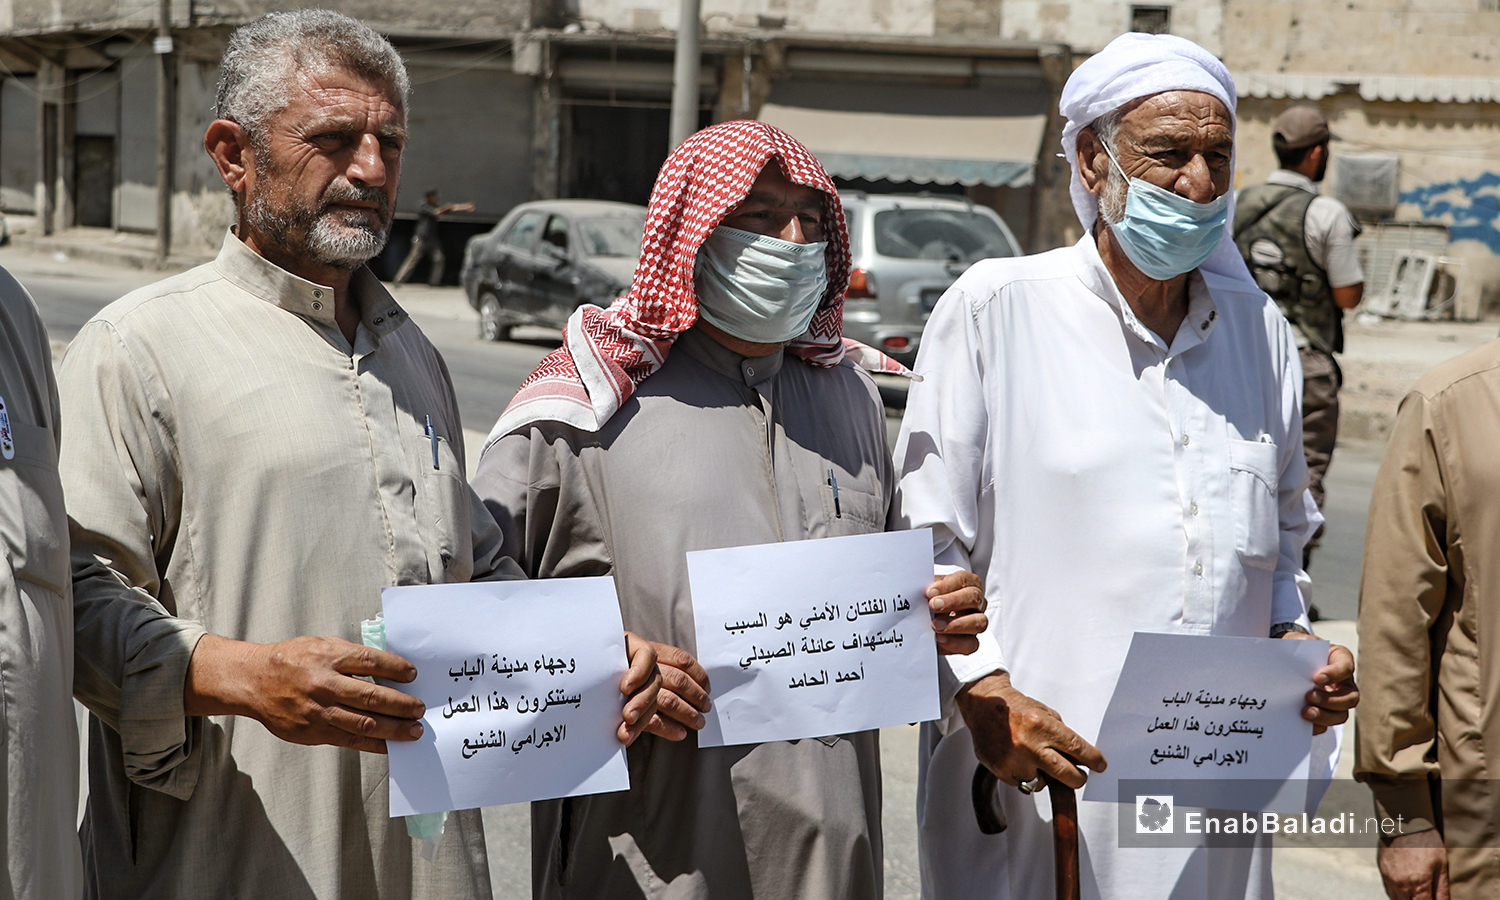 A protest stand was organized by the doctors and pharmacists